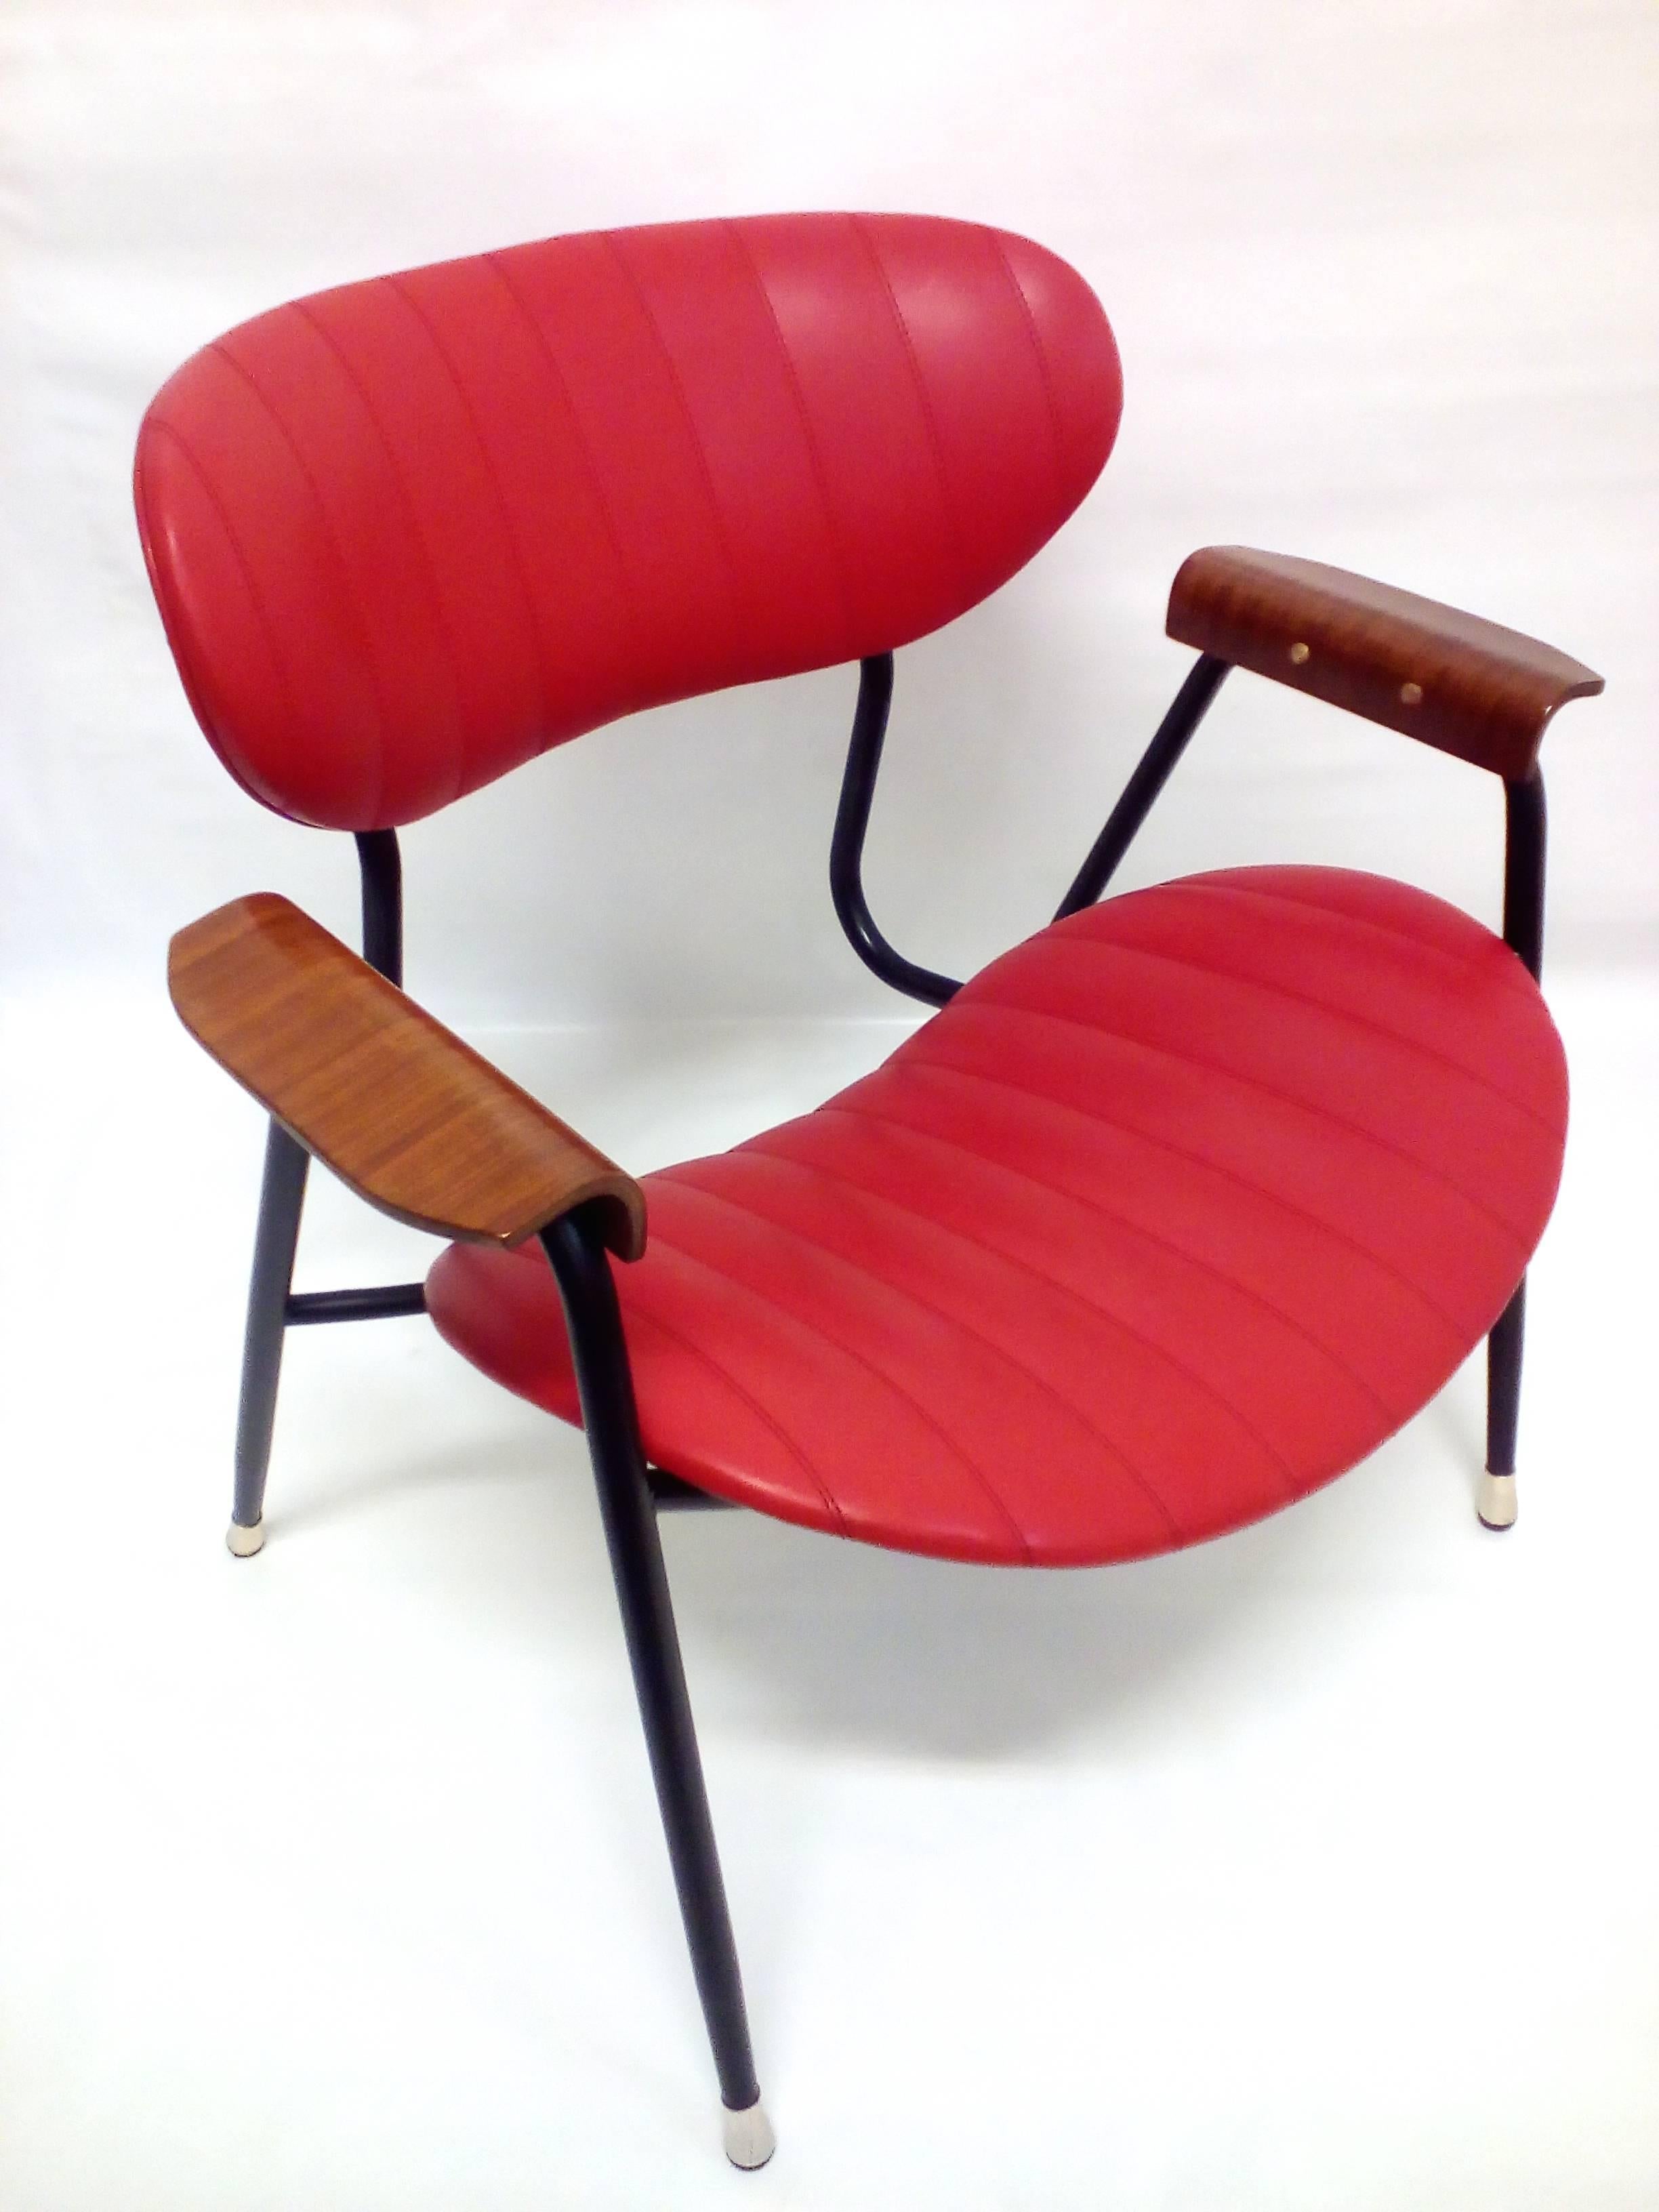 Excellent pair of Mid century side chairs with original bright red faux leather upholstering in great condition.
Black metal frame which is nicely detailed and elegant plywood armrests with brass attachments.